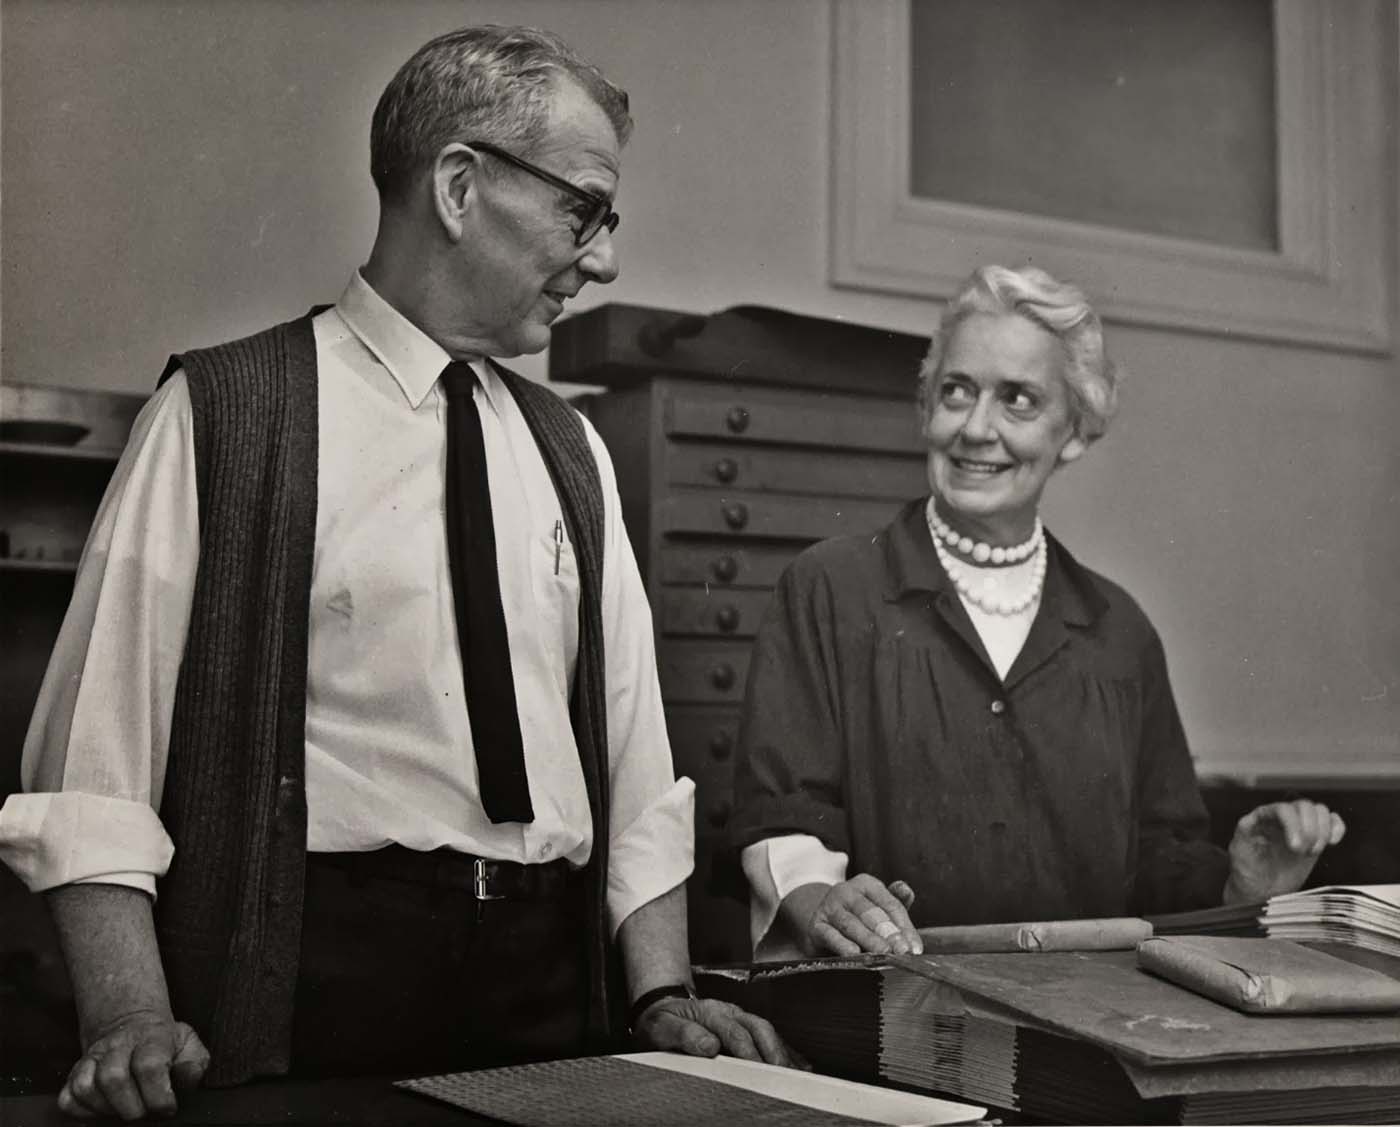 Jane and Robert Grabhorn [n.d.] (Book Arts &amp; Special Collections, San Francisco Public Library)